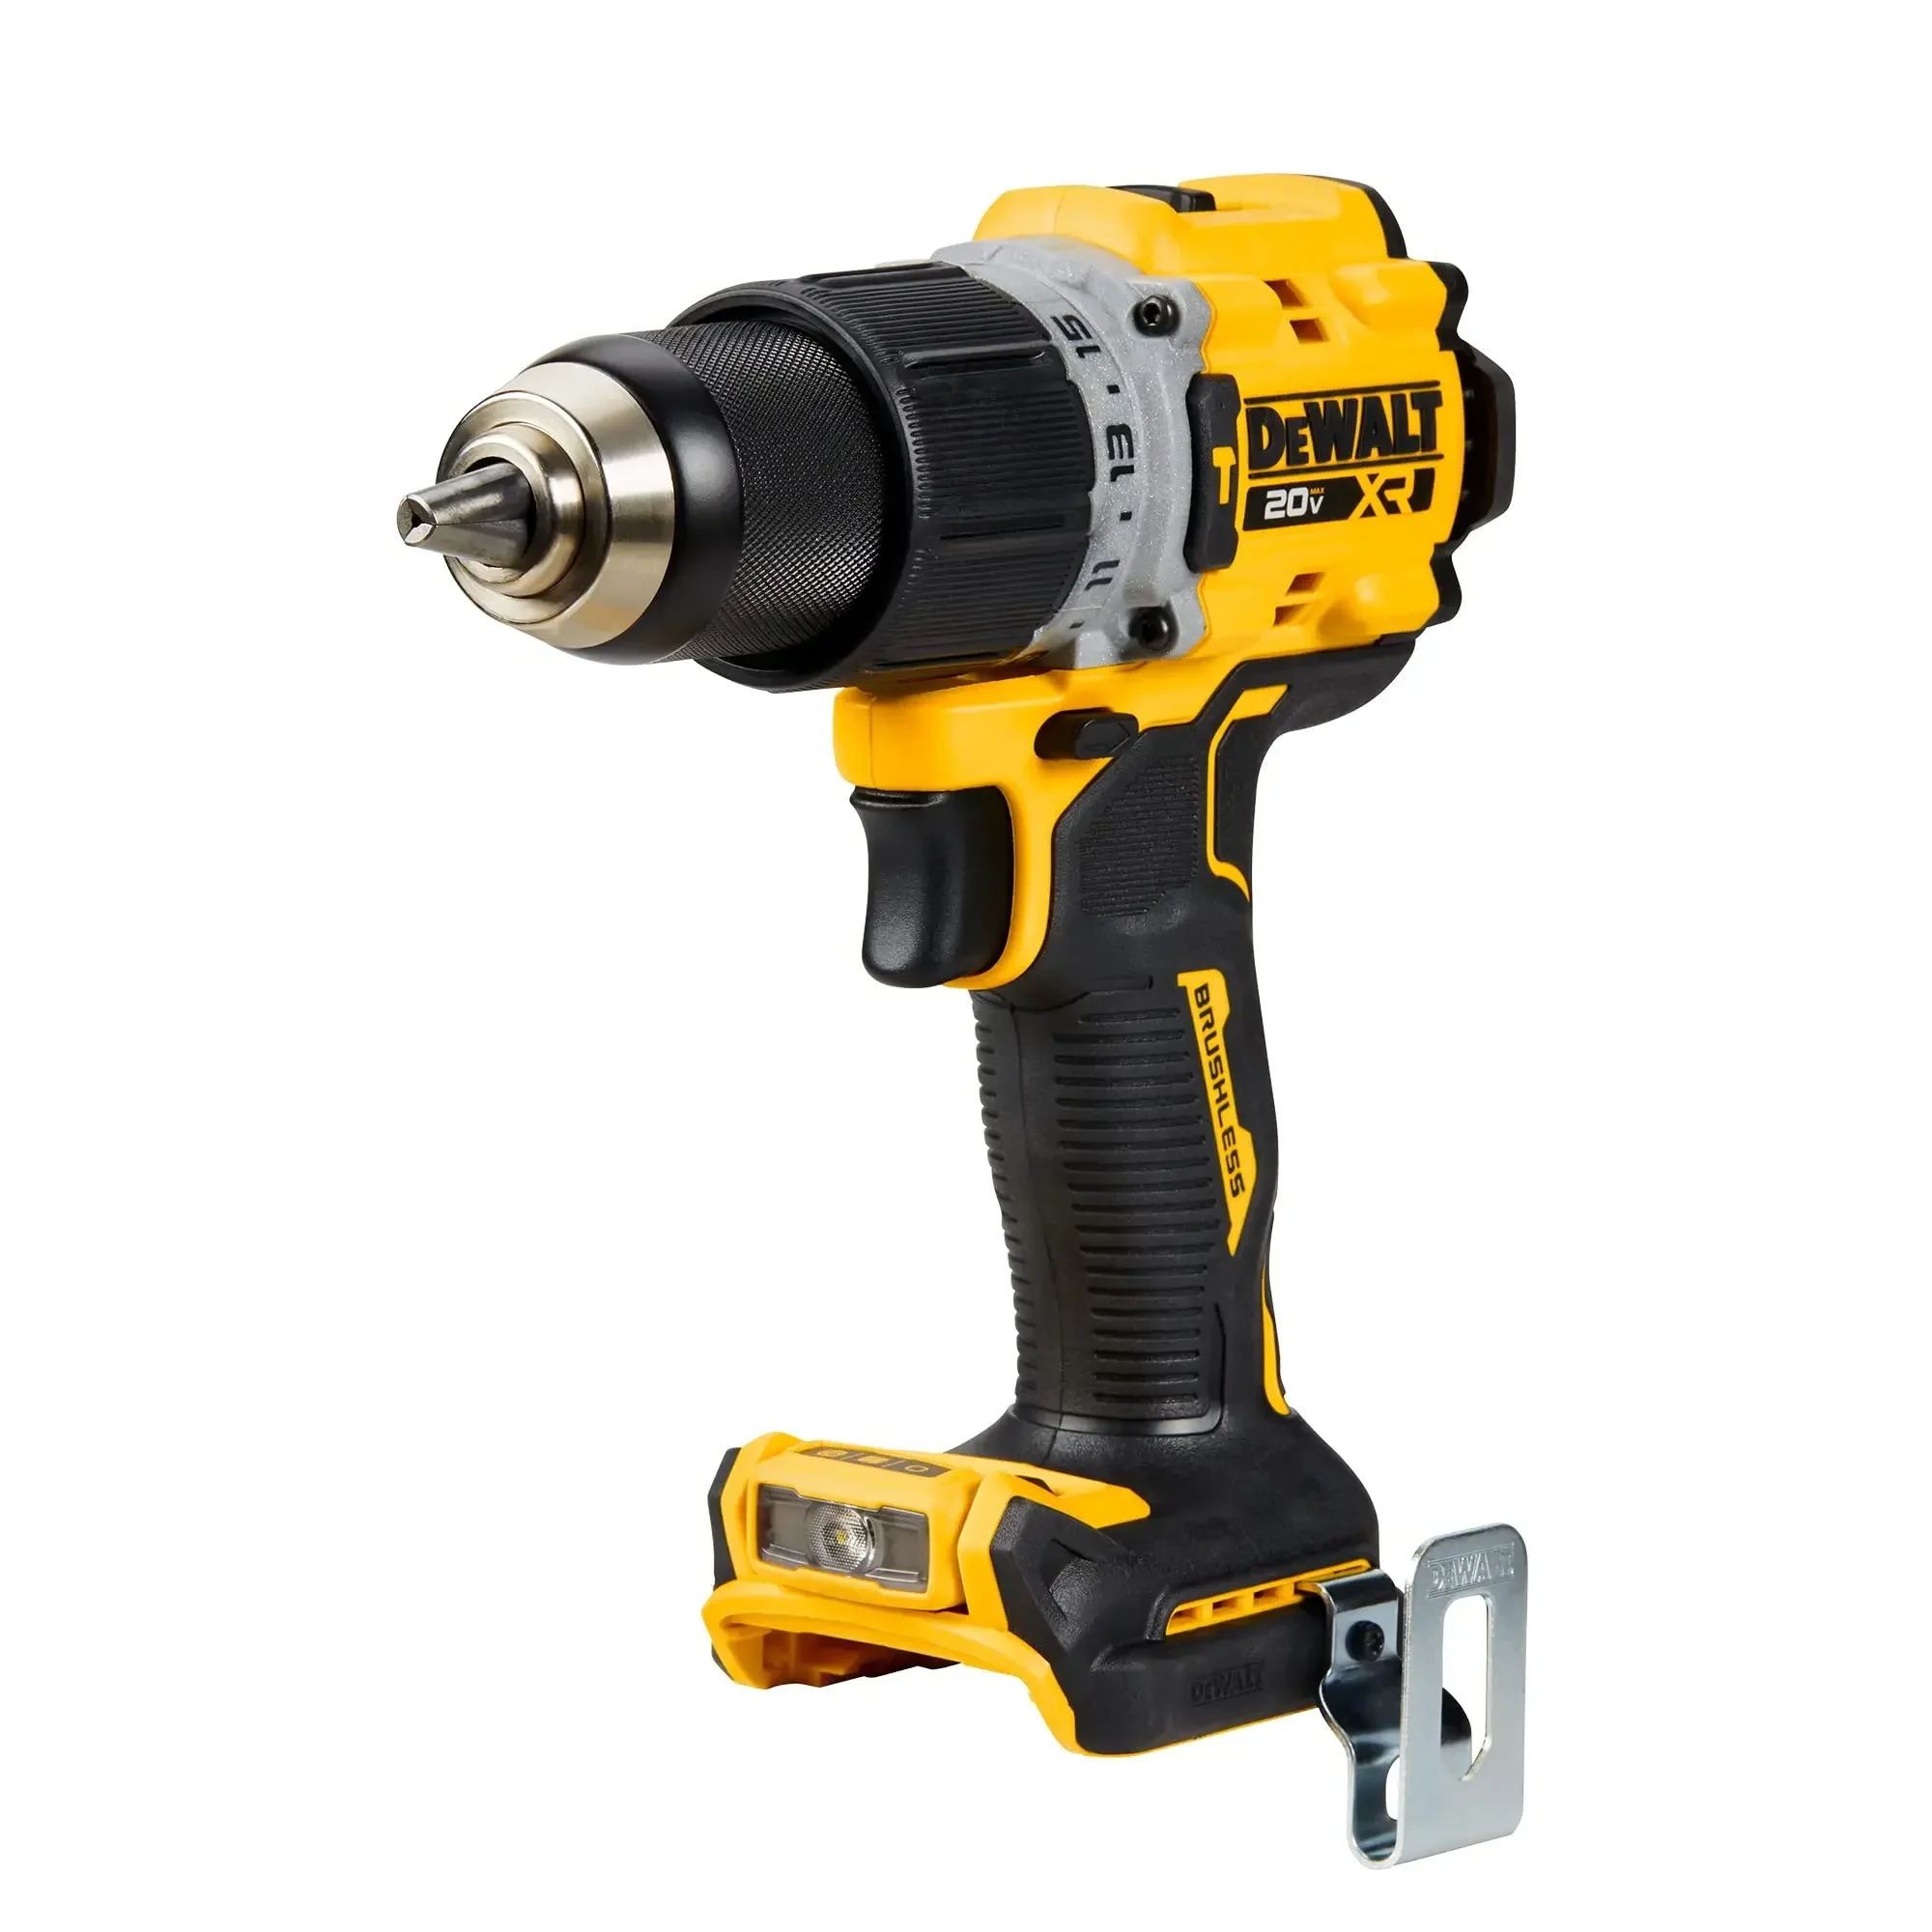 

DEWALT 20V MAX Hammer Drill, 1/2", Cordless and Brushless, Compact With 2-Speed Setting, Bare screwdriver power tool DCD805B